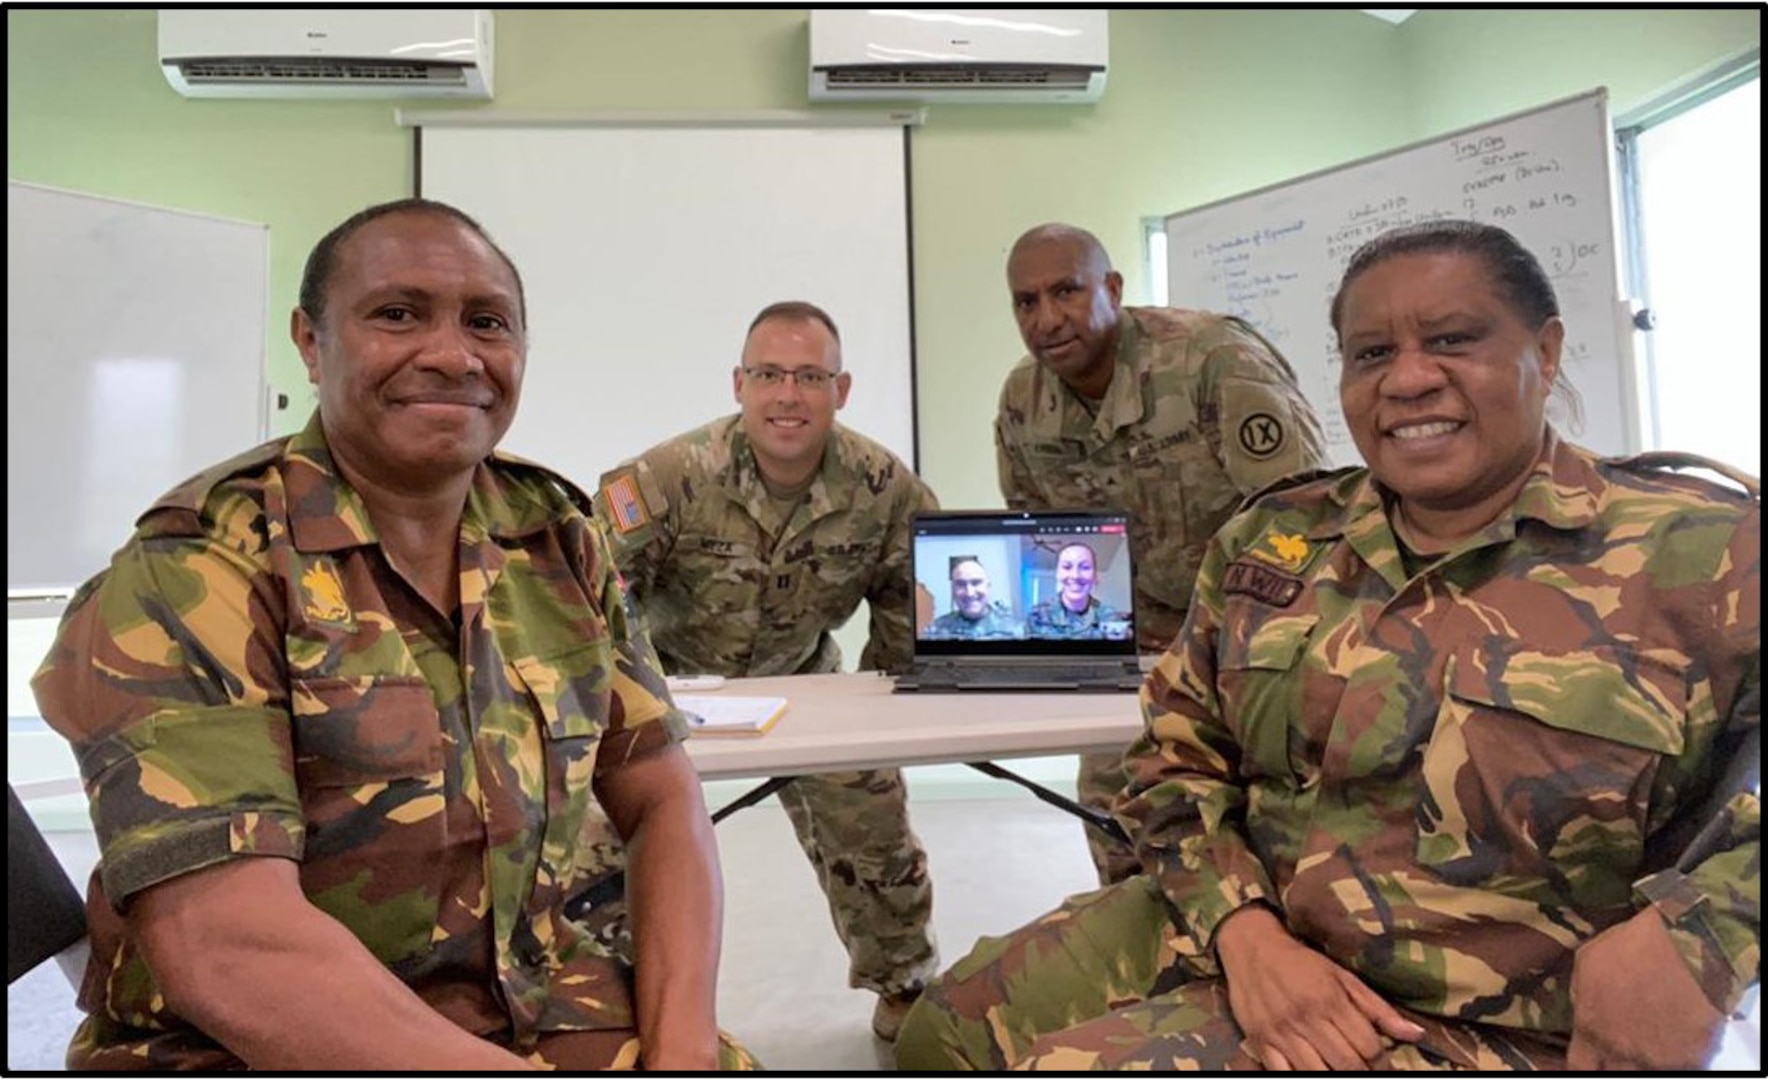 Members of the Wisconsin National Guard State Partnership Program and the Papua New Guinea Defense Force meet to discuss gender goals and policies in the Papua New Guinea Defence Force Feb. 18, 2021.